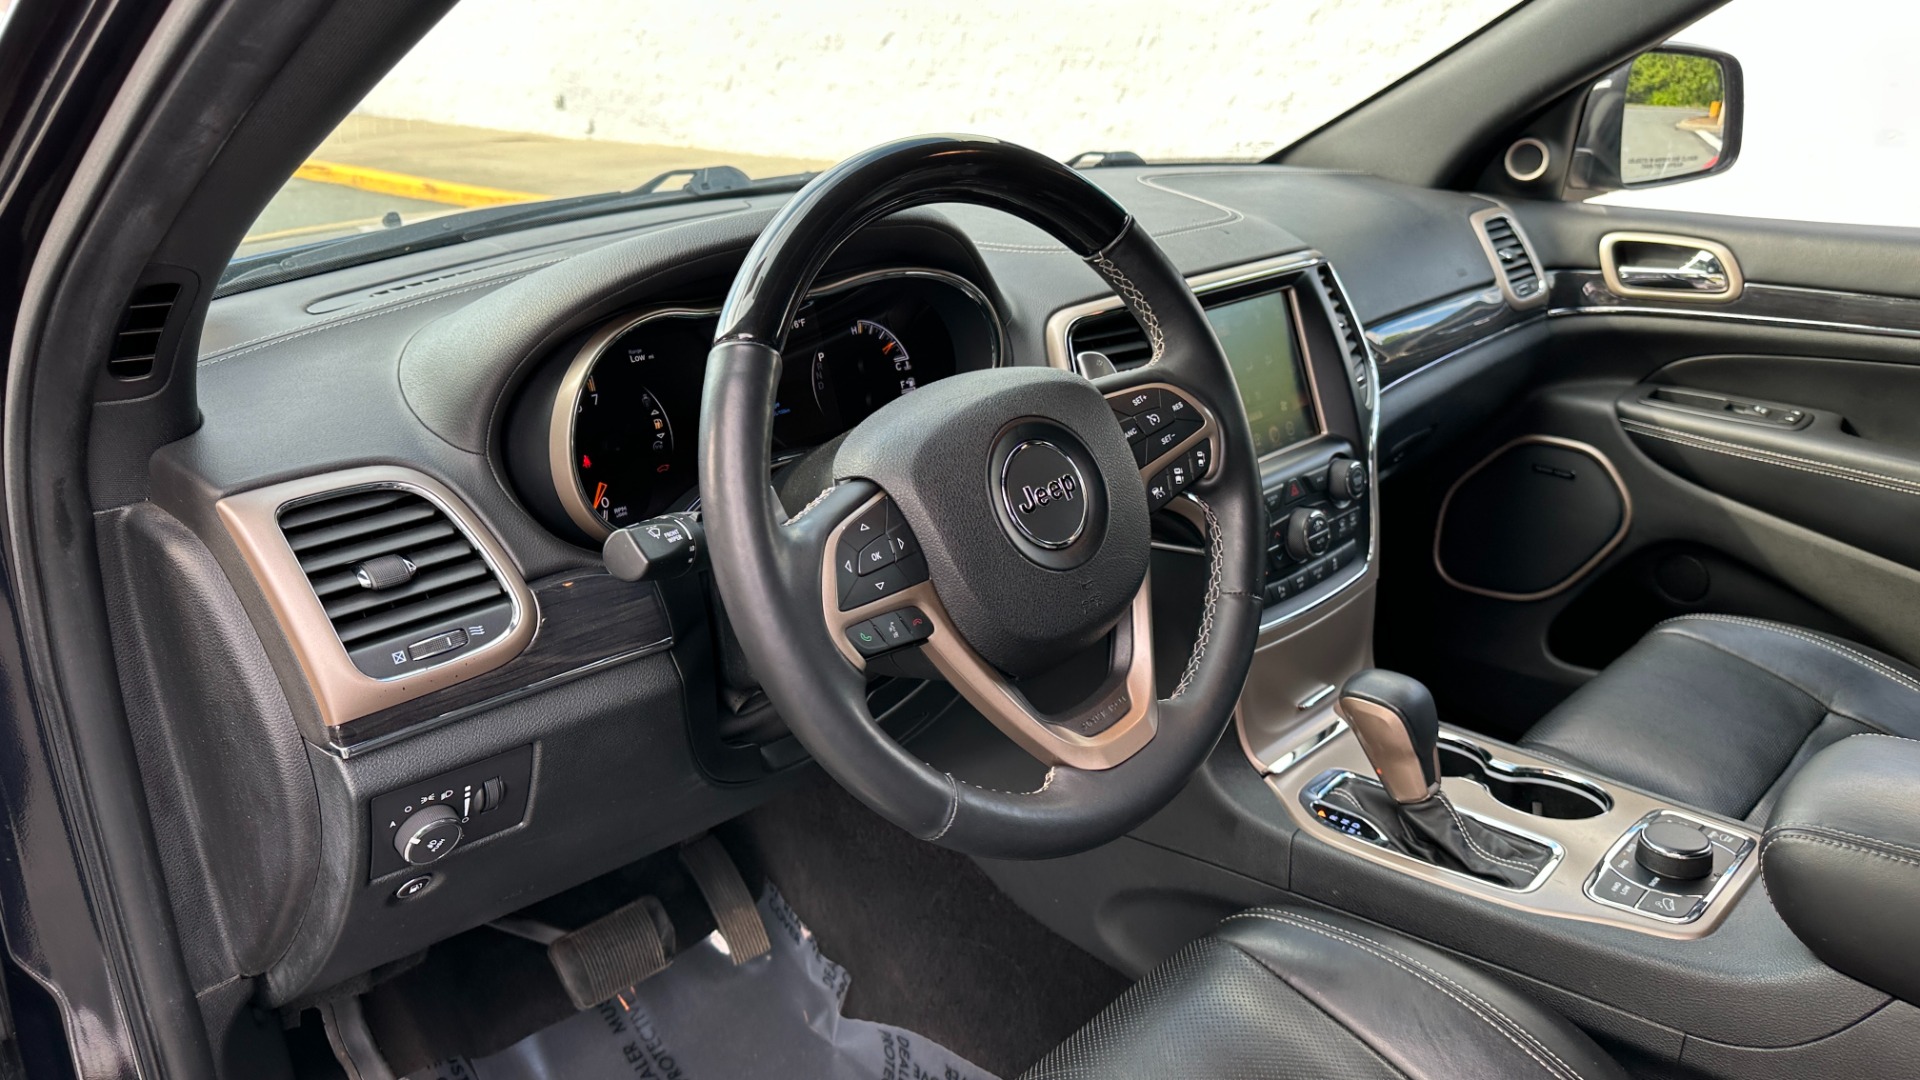 Used 2016 Jeep Grand Cherokee OVERLAND / 5.7L V8 ENGINE / 4WD / HARMAN KARDON for sale $24,495 at Formula Imports in Charlotte NC 28227 11